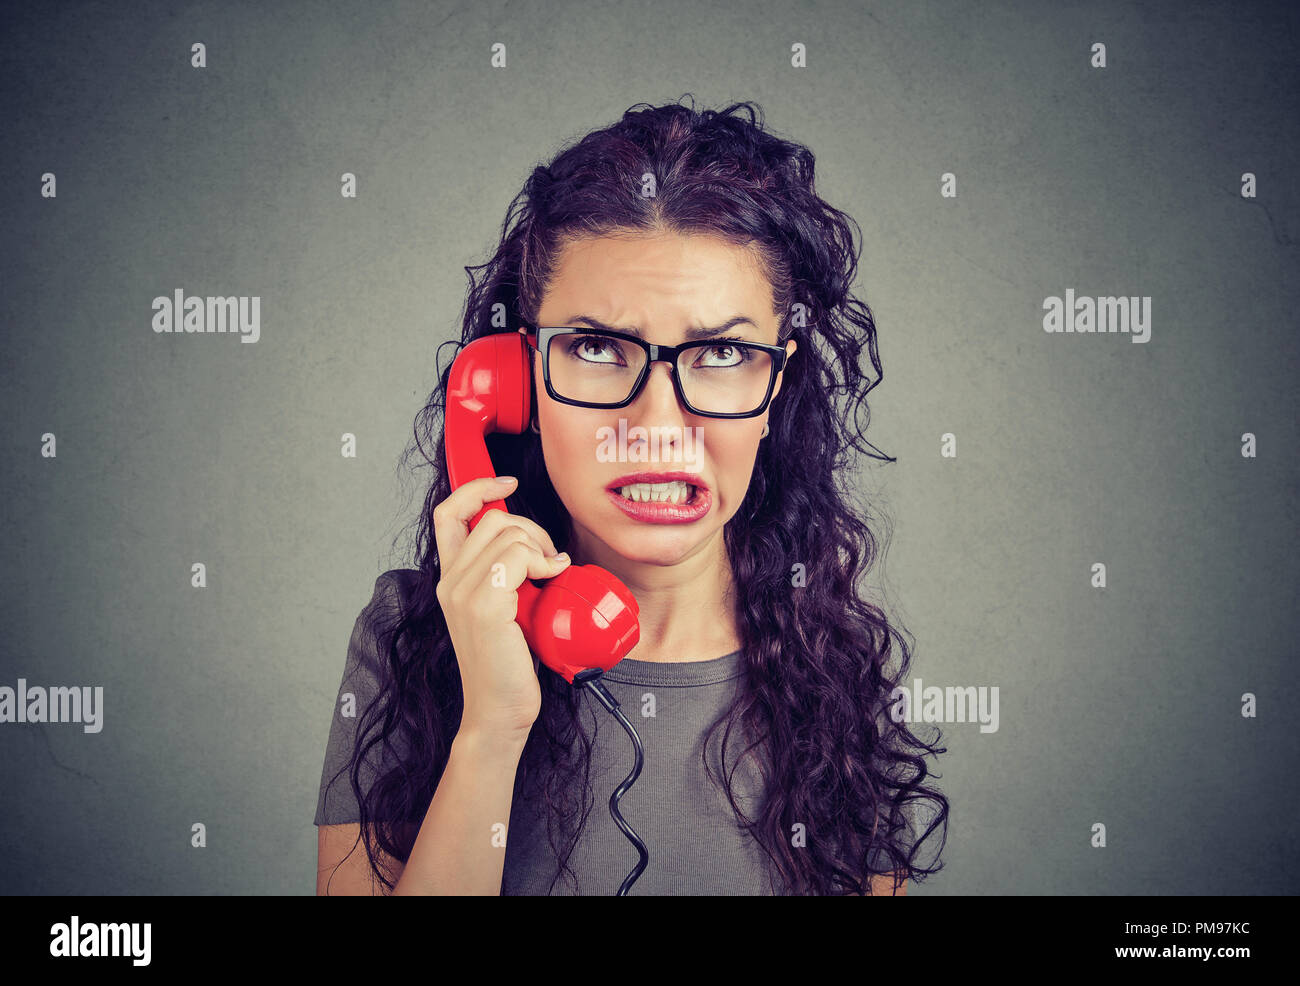 Young displeased upset woman speaking on a telephone and looking disgusted with bad news and problems Stock Photo